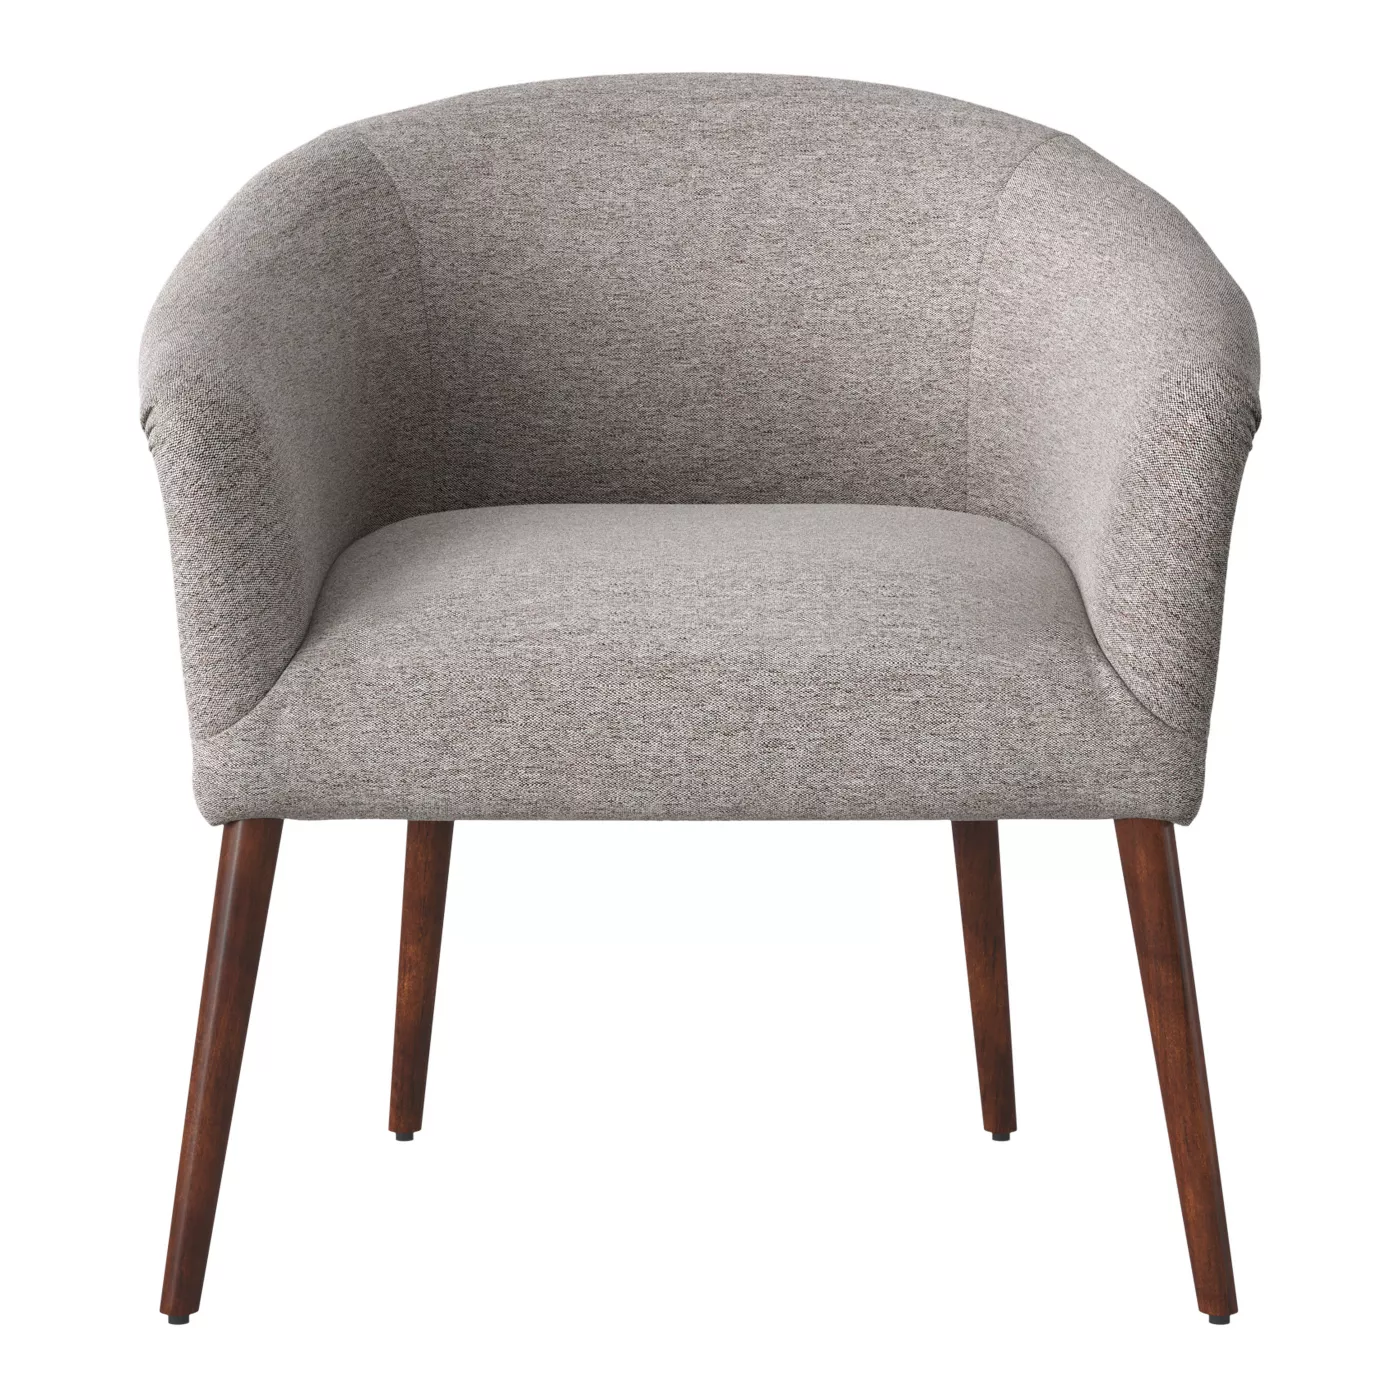 Pomeroy Barrel Chair Gray - Project 62™ - image 1 of 11